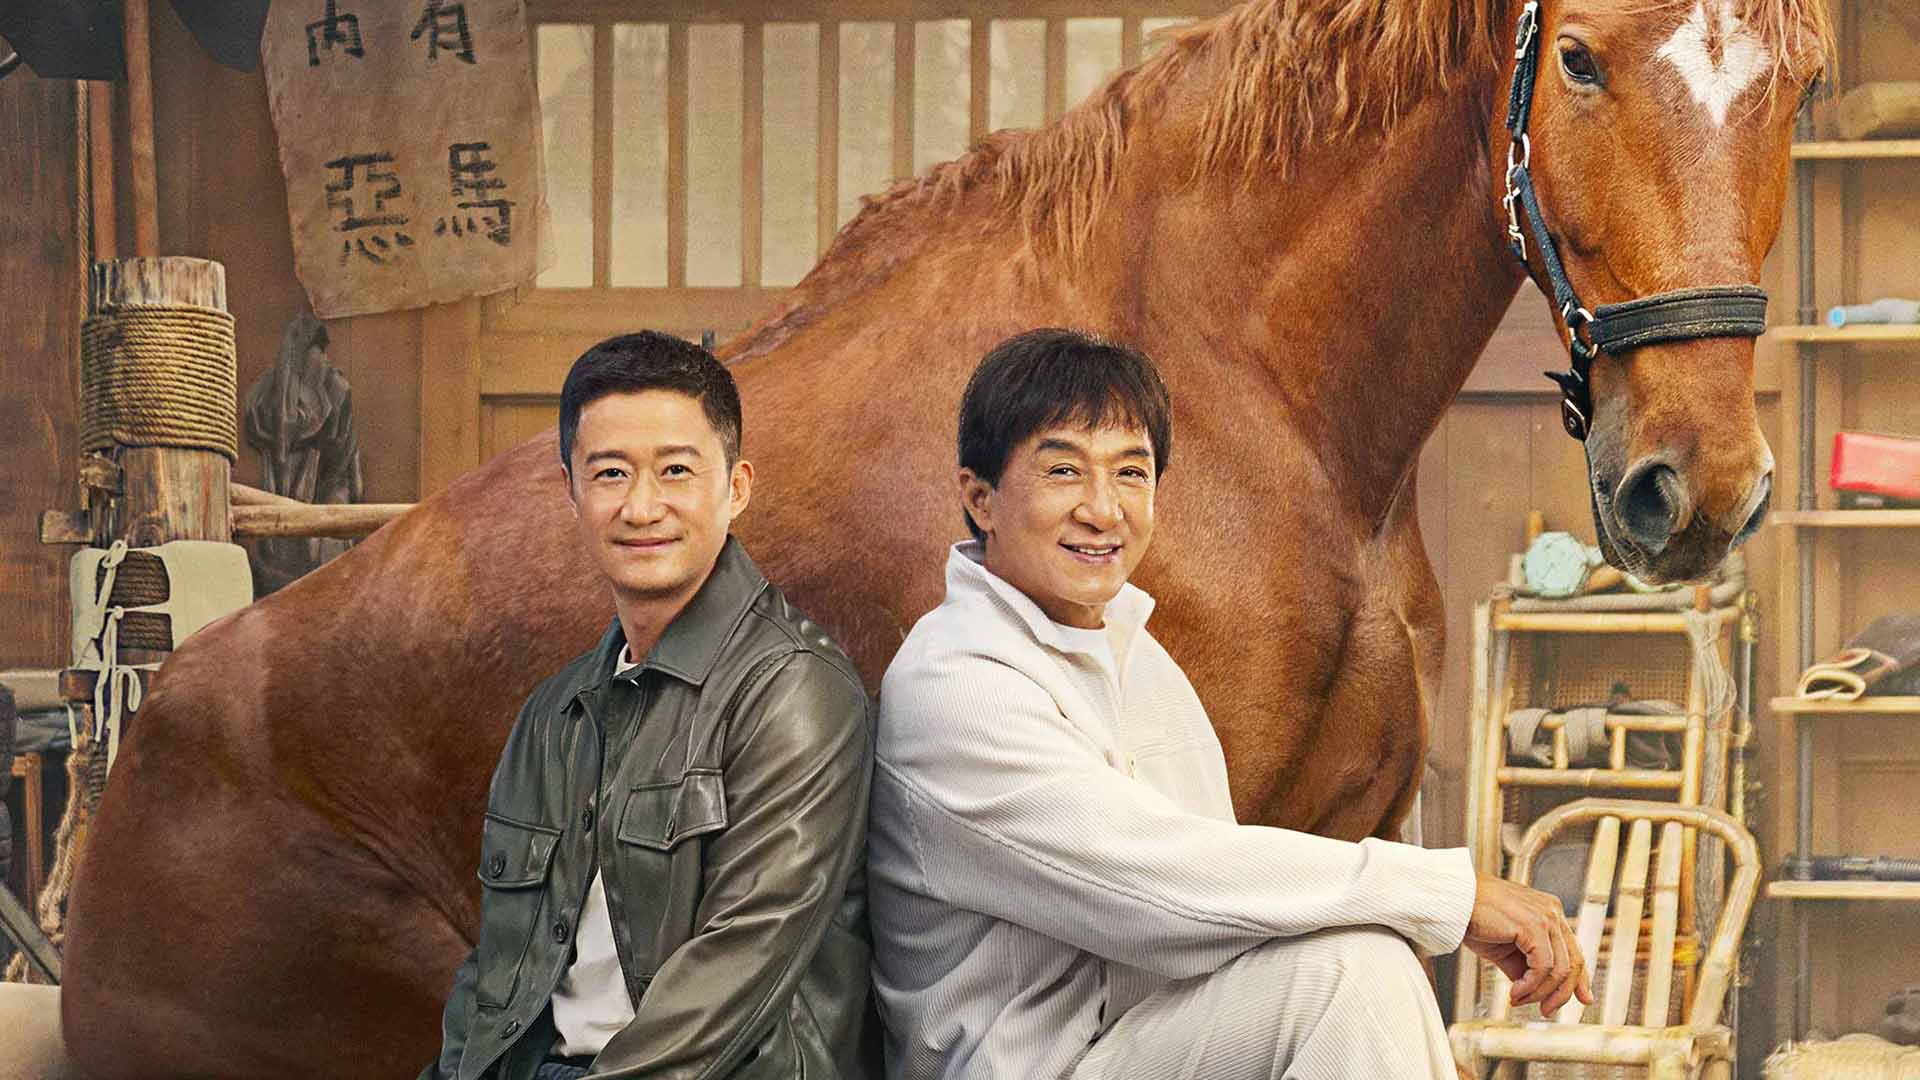 Trailer Watch: Jackie Chan And Wu Jing (And A Horse) Team Up In